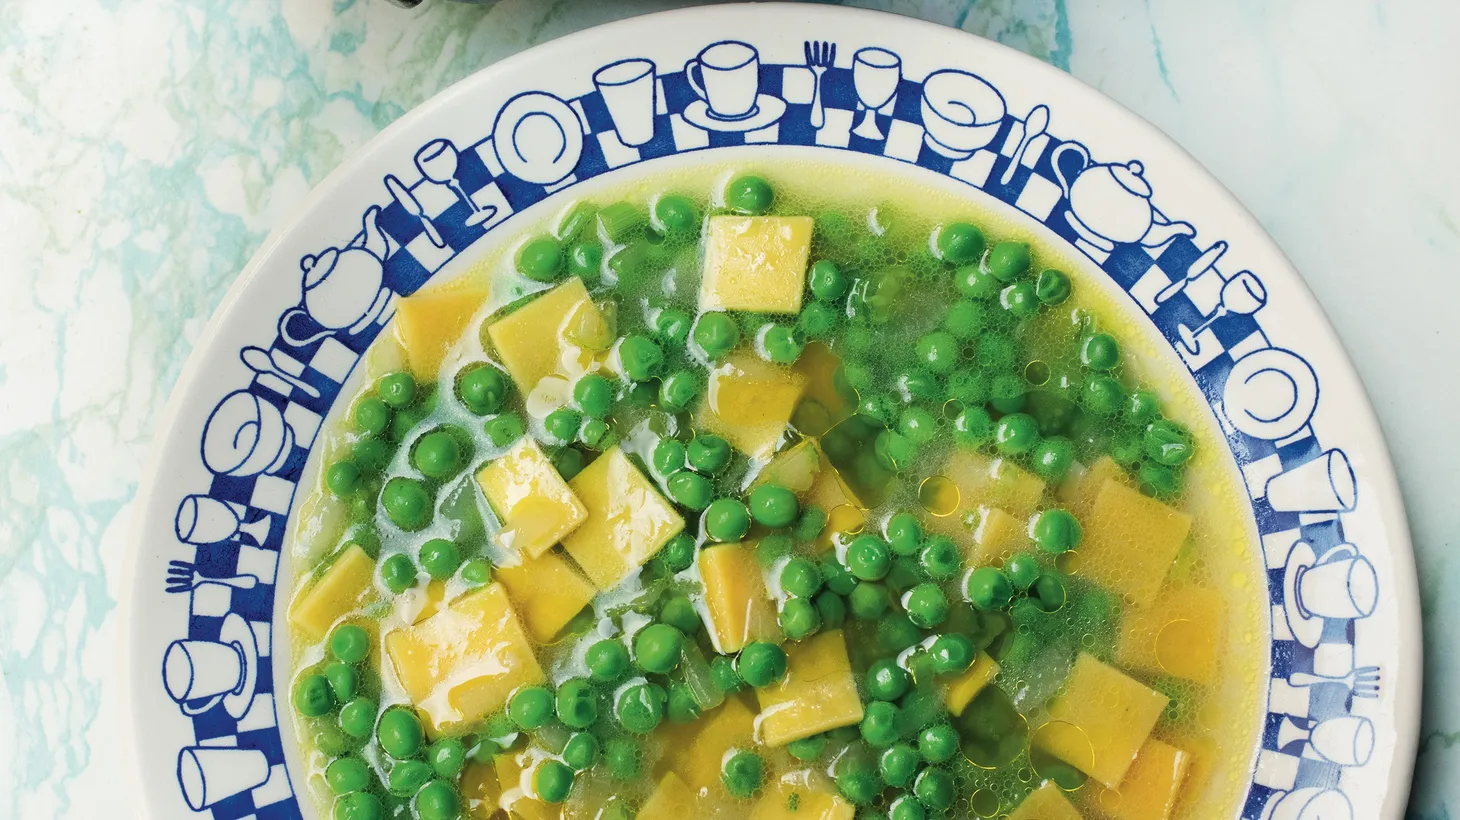 Squares of pasta with peas known as quadrucci served with a cheesy broth hails from Rome.